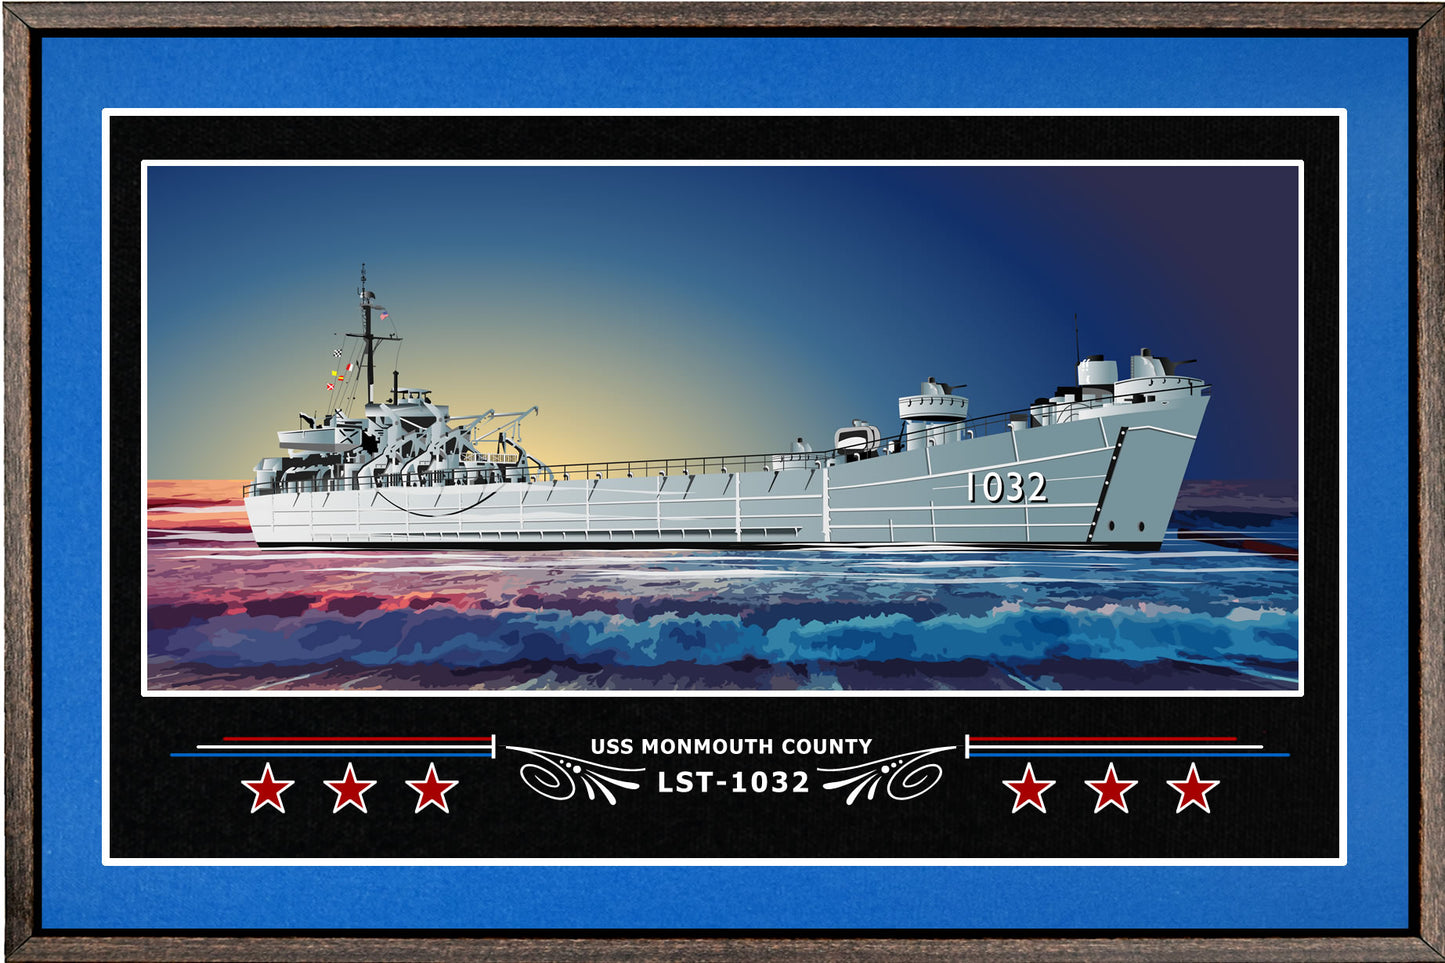 USS MONMOUTH COUNTY LST 1032 BOX FRAMED CANVAS ART BLUE